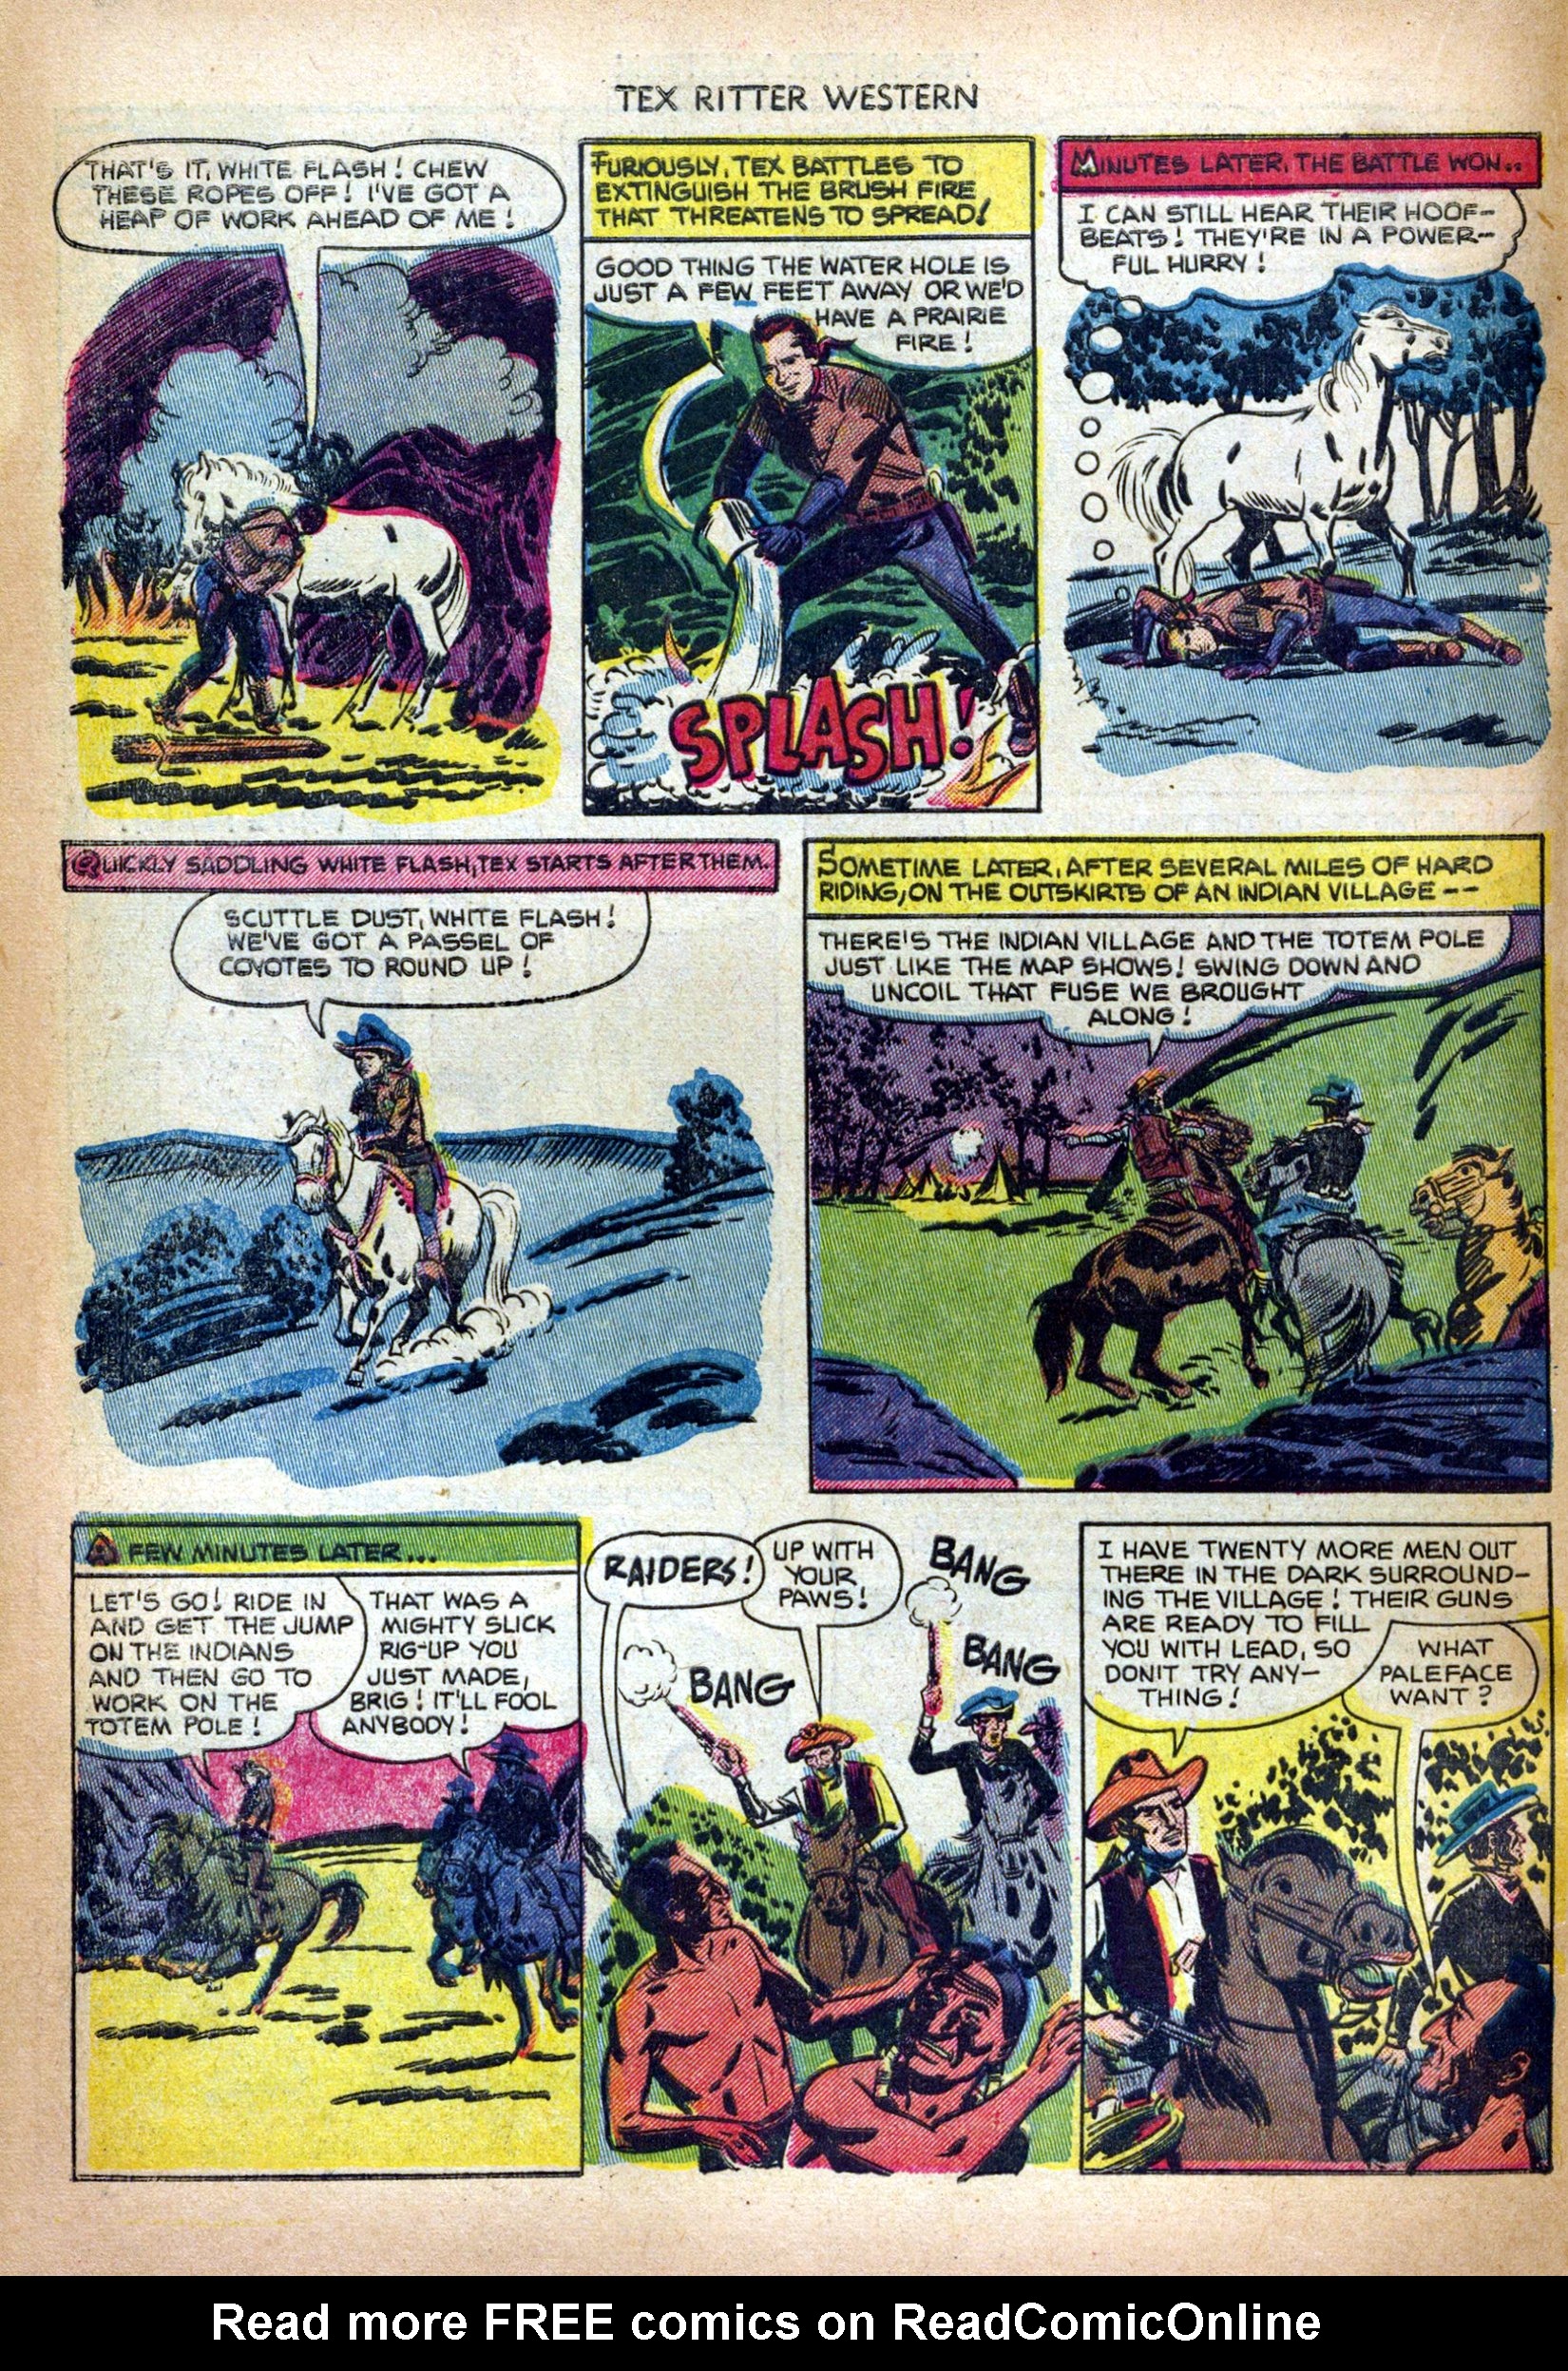 Read online Tex Ritter Western comic -  Issue #11 - 18